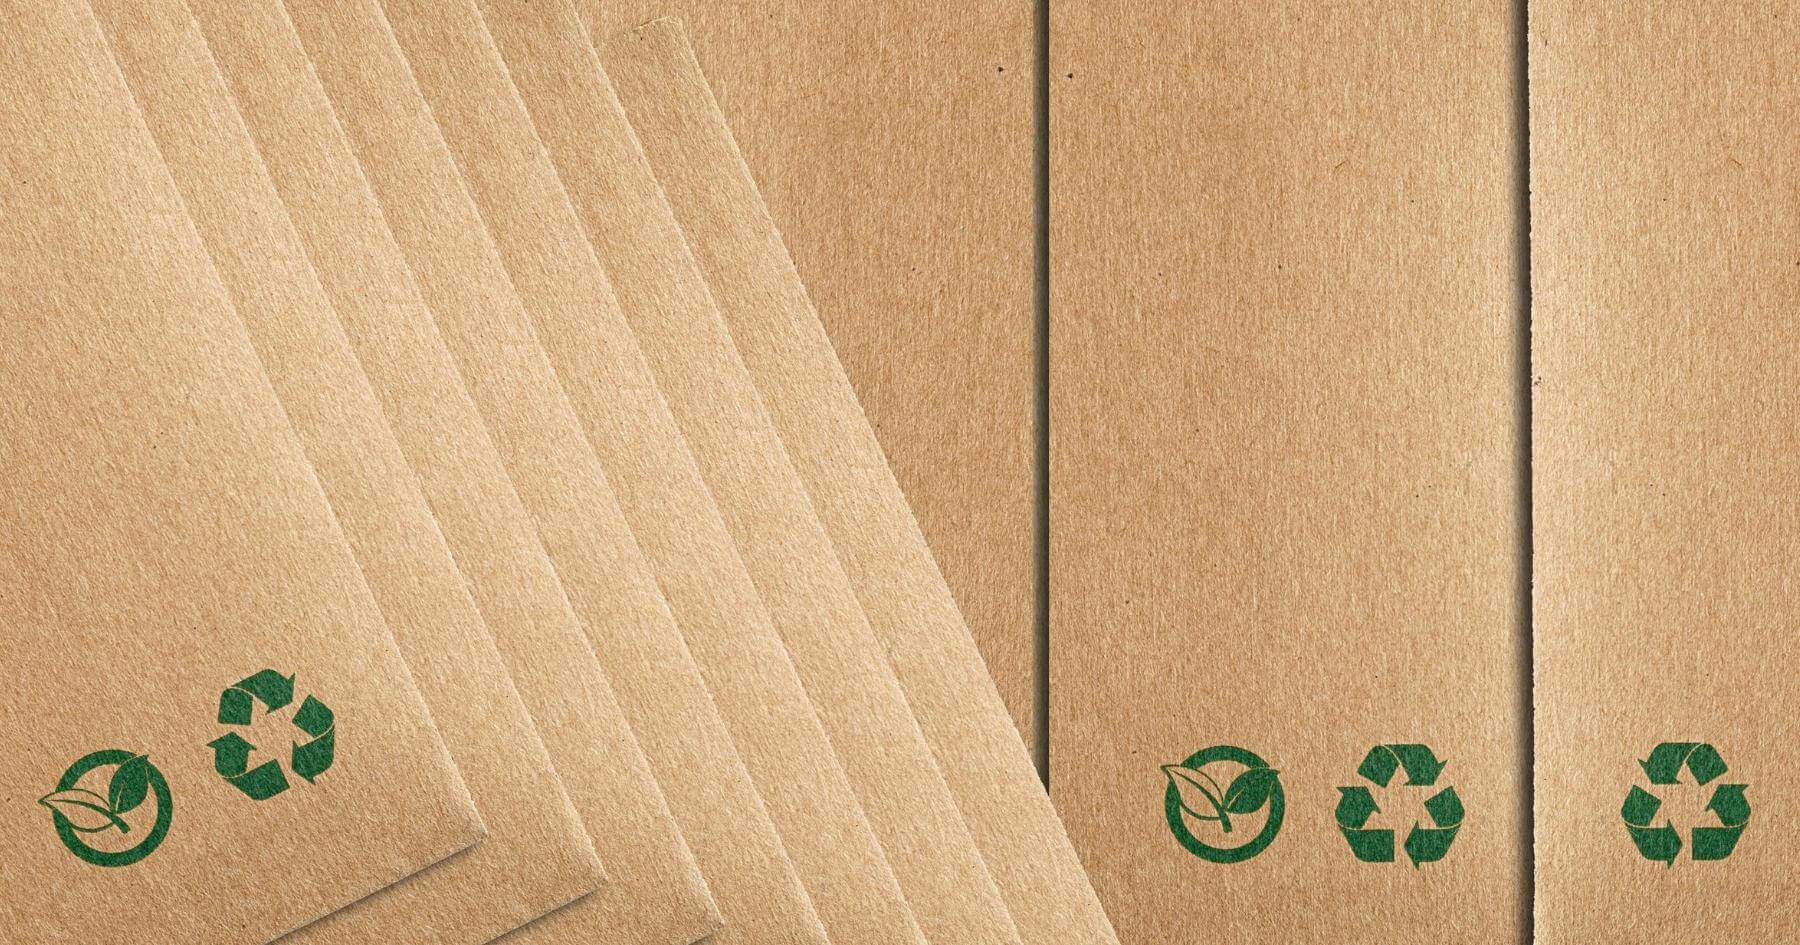 The Pros and Cons of Sustainable Packaging